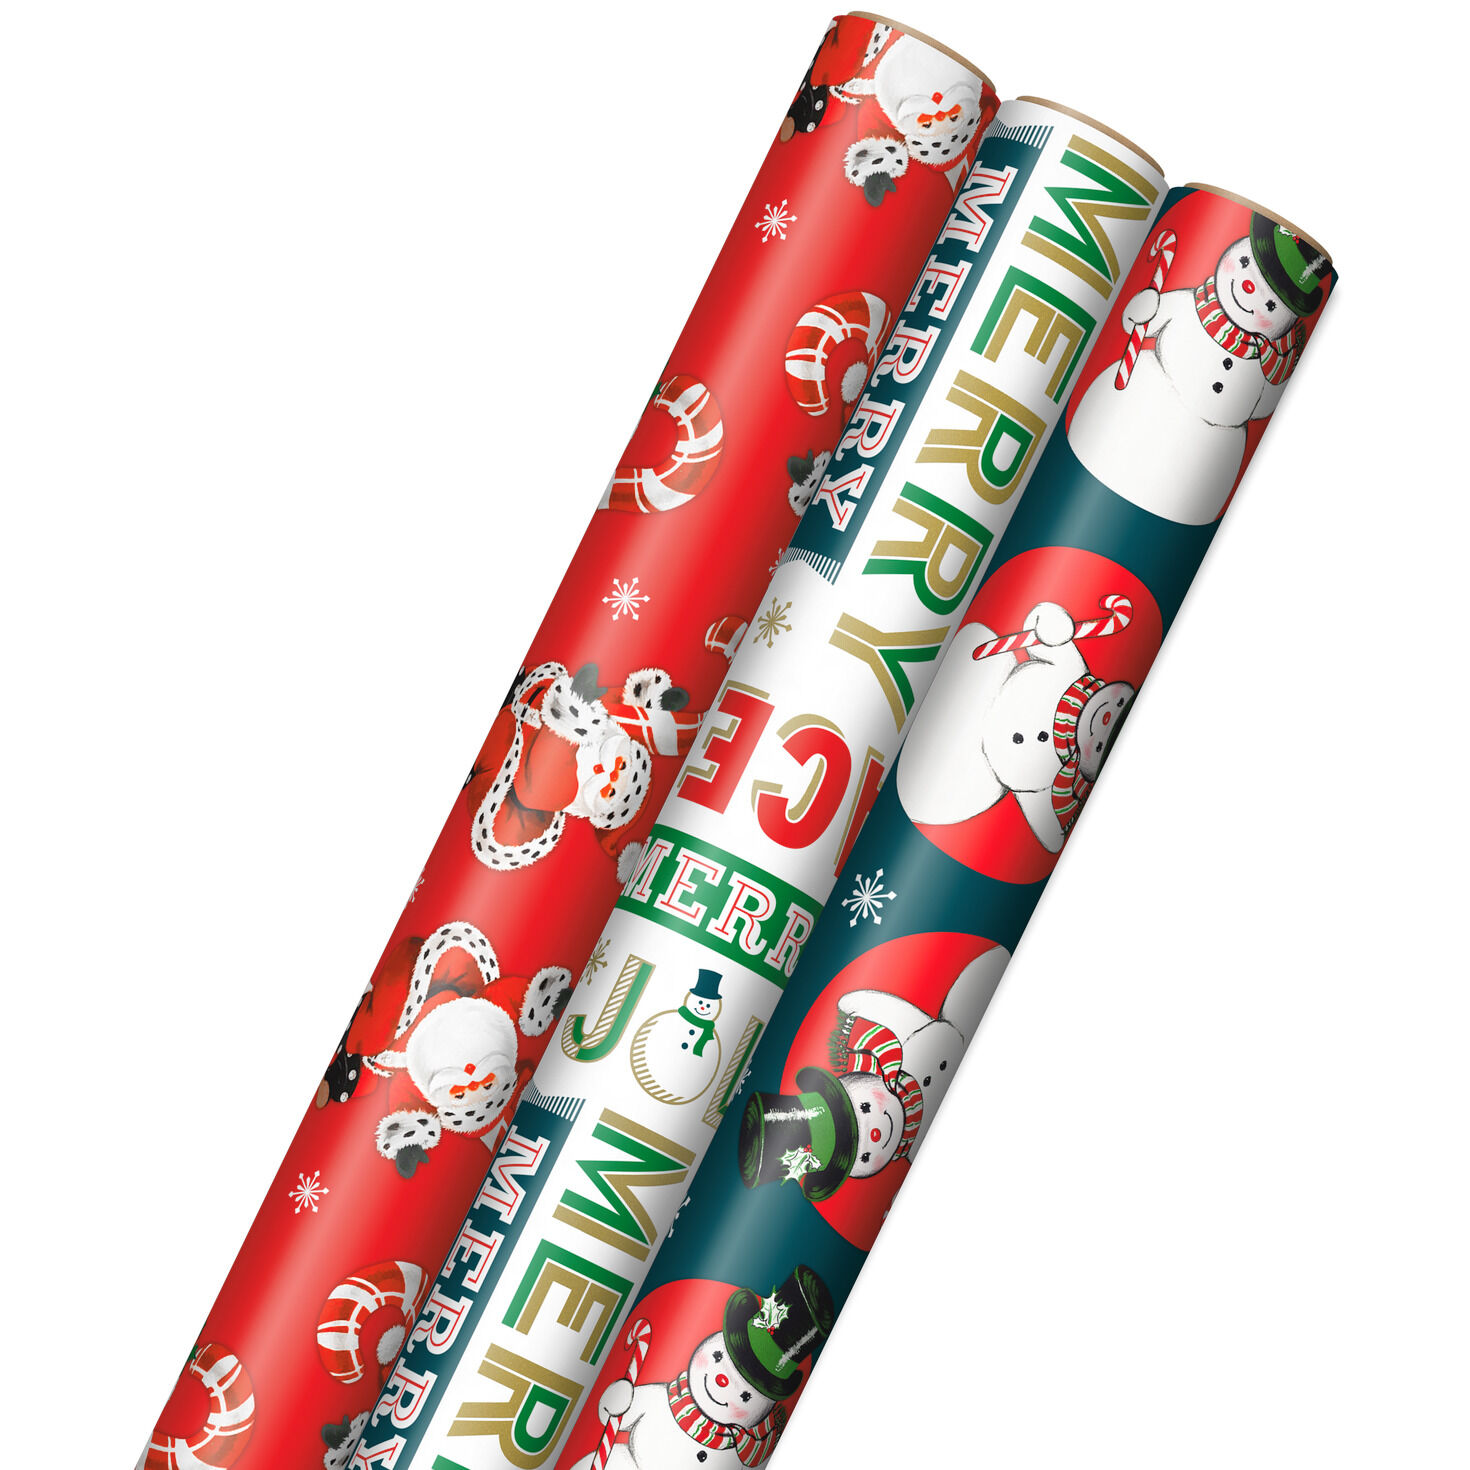 Vintage Ornaments Gift Wrap, Wrapping Paper